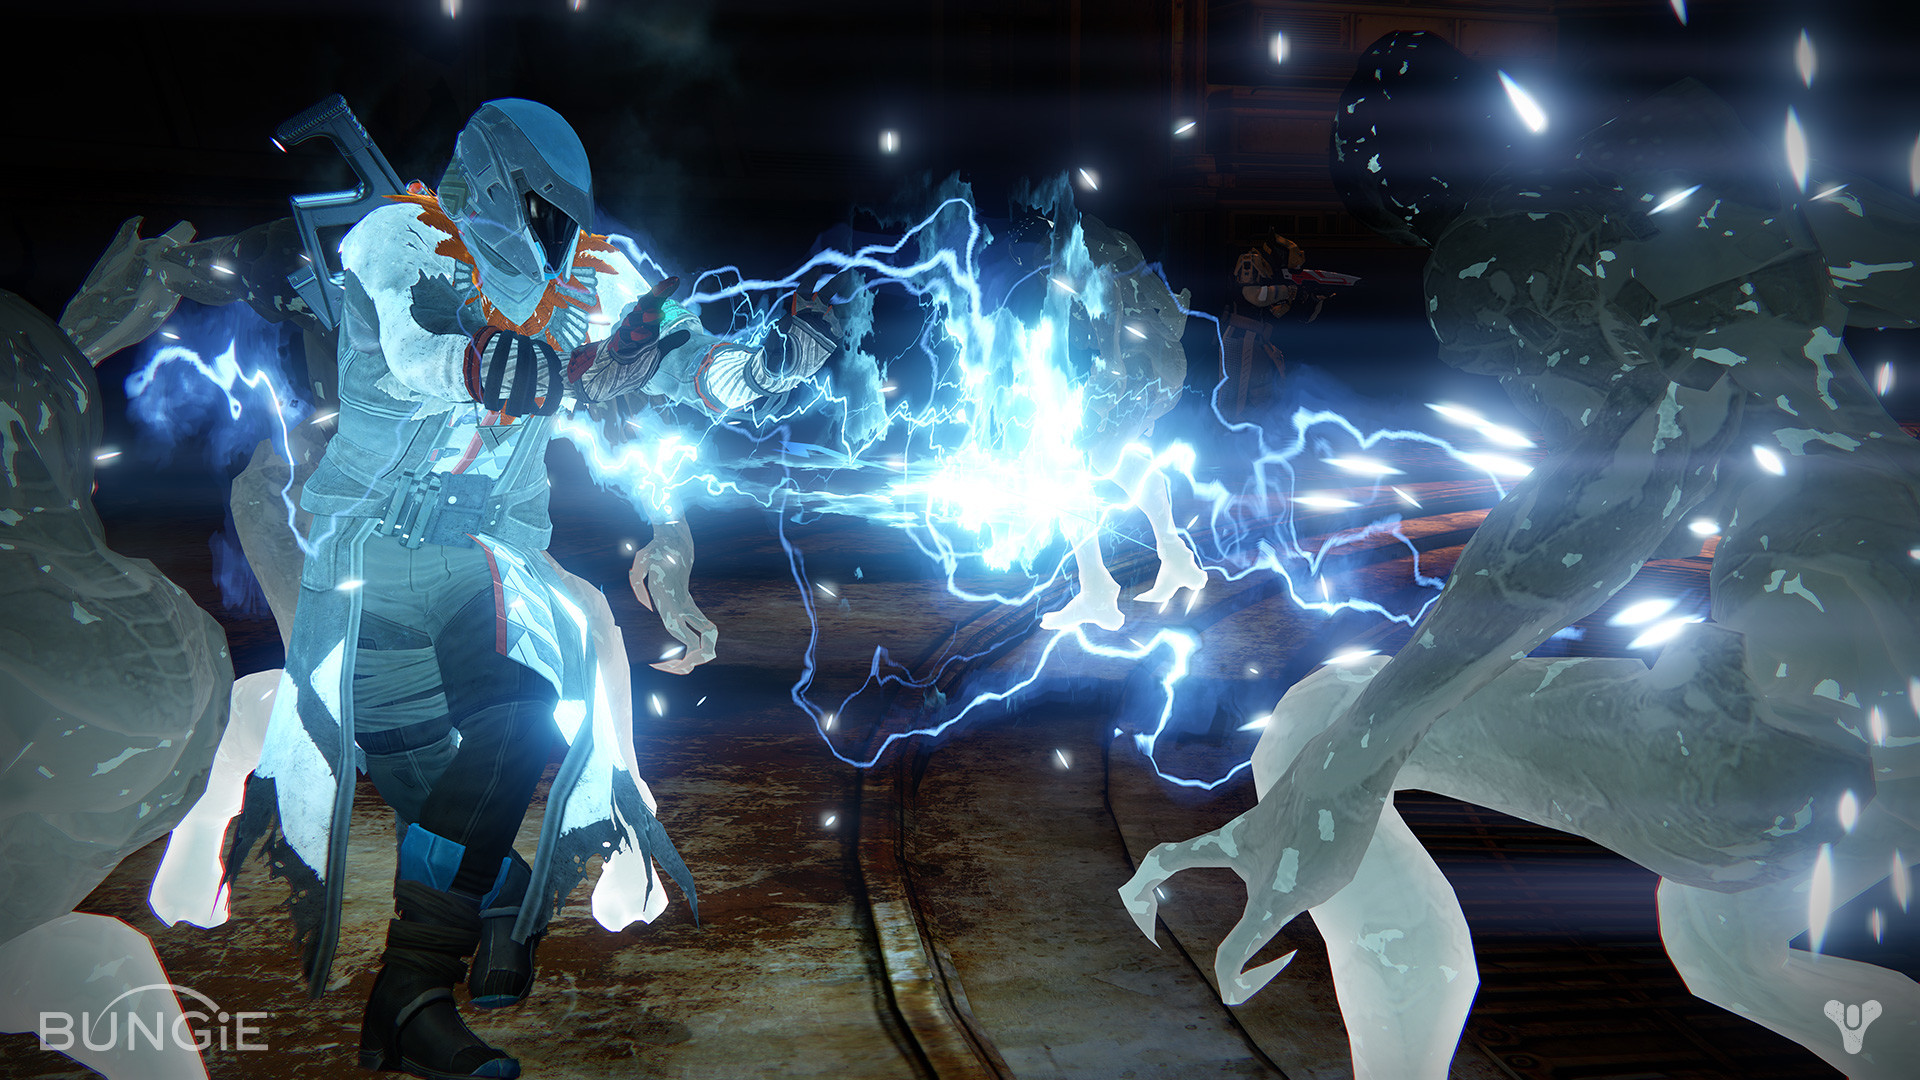 1920x1080 Destiny: The Taken King Might Not Run on Your Xbox 360 or PS3 - GameSpot